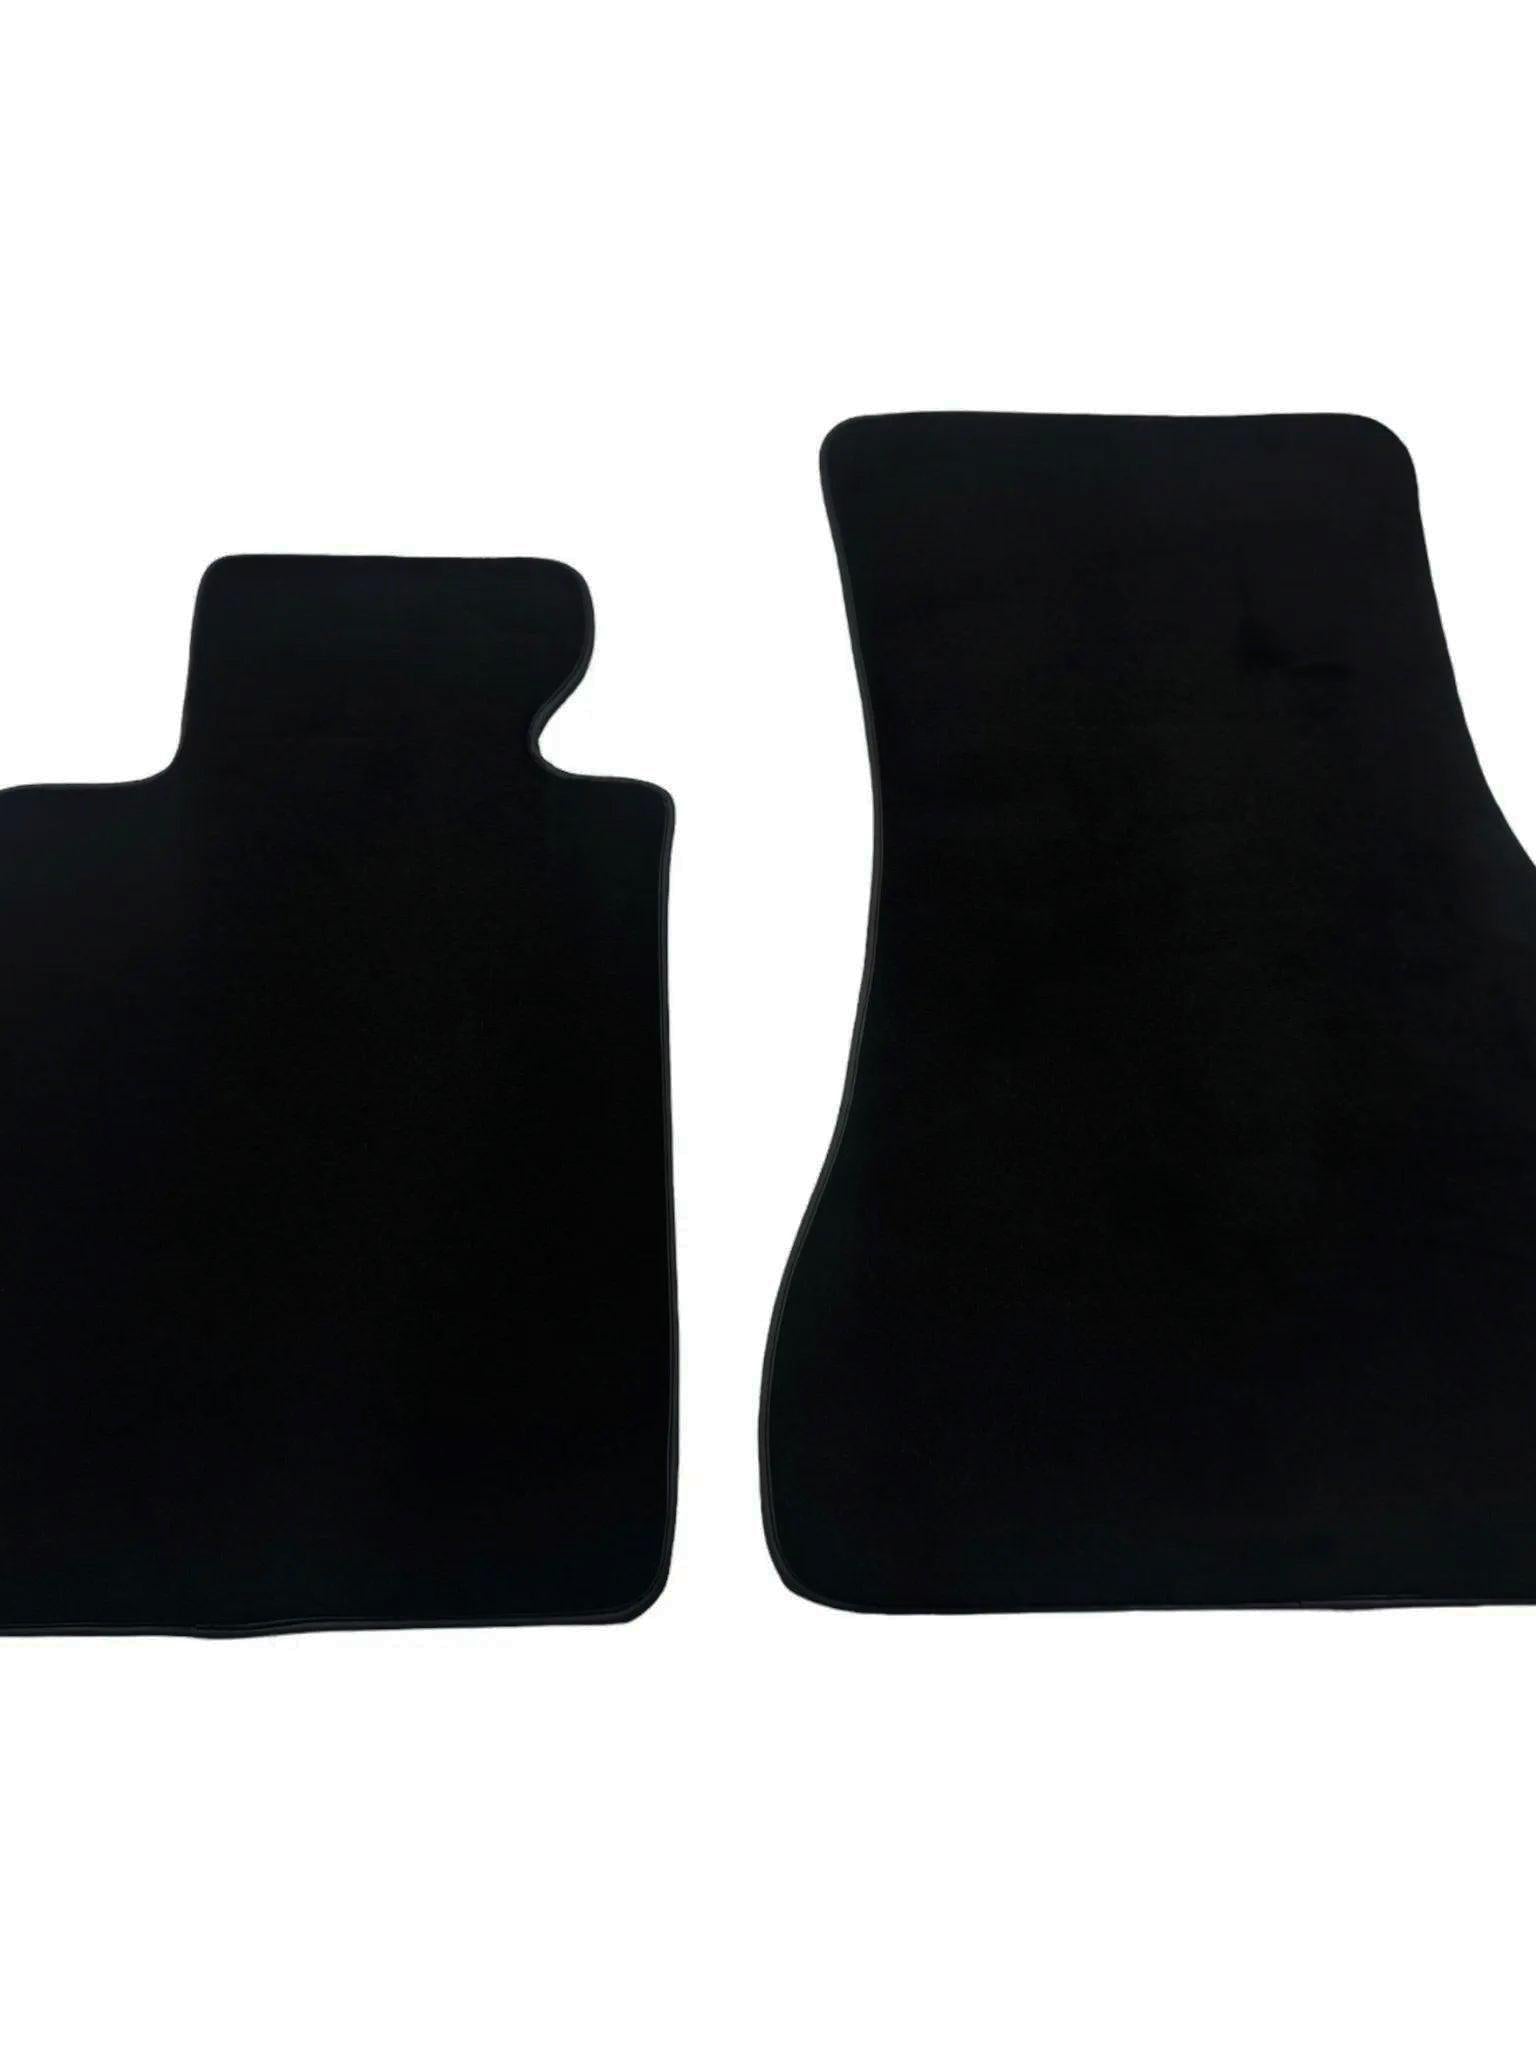 Black Floor Floor Mats For BMW X6 Series E71 Germany Edition - AutoWin